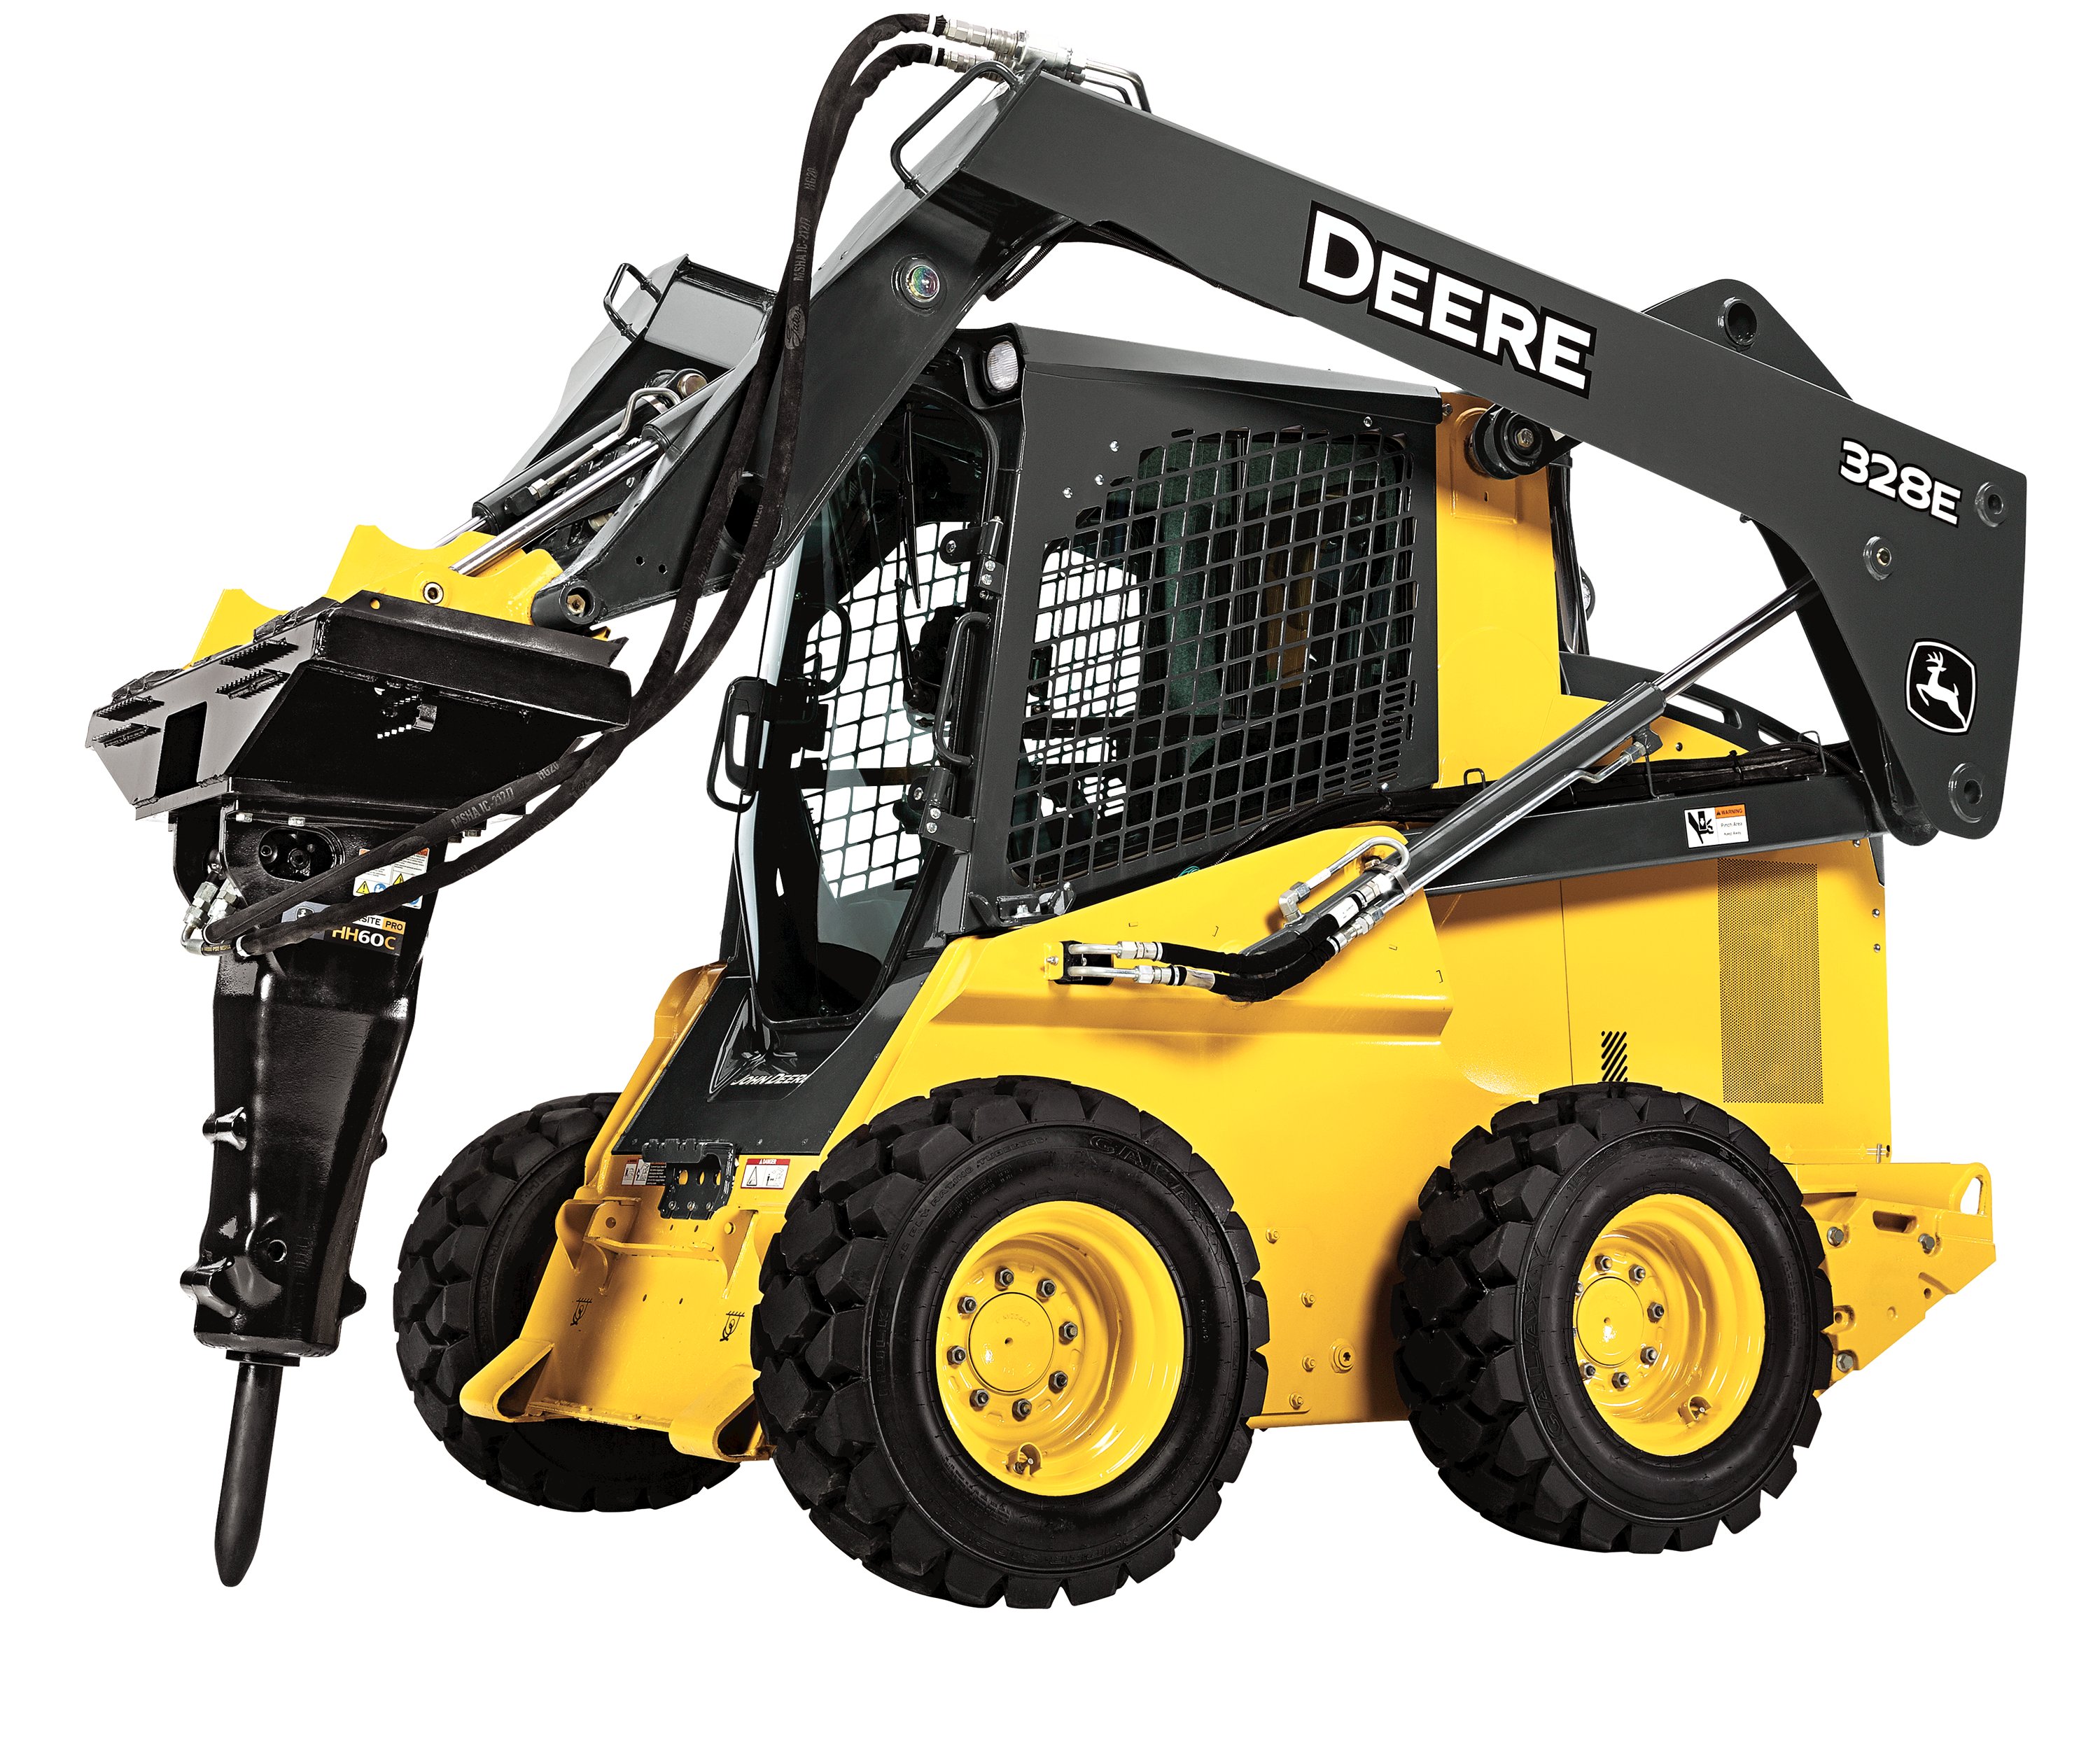 New Hydraulic Hammers In Attachments Lineup | John Deere US